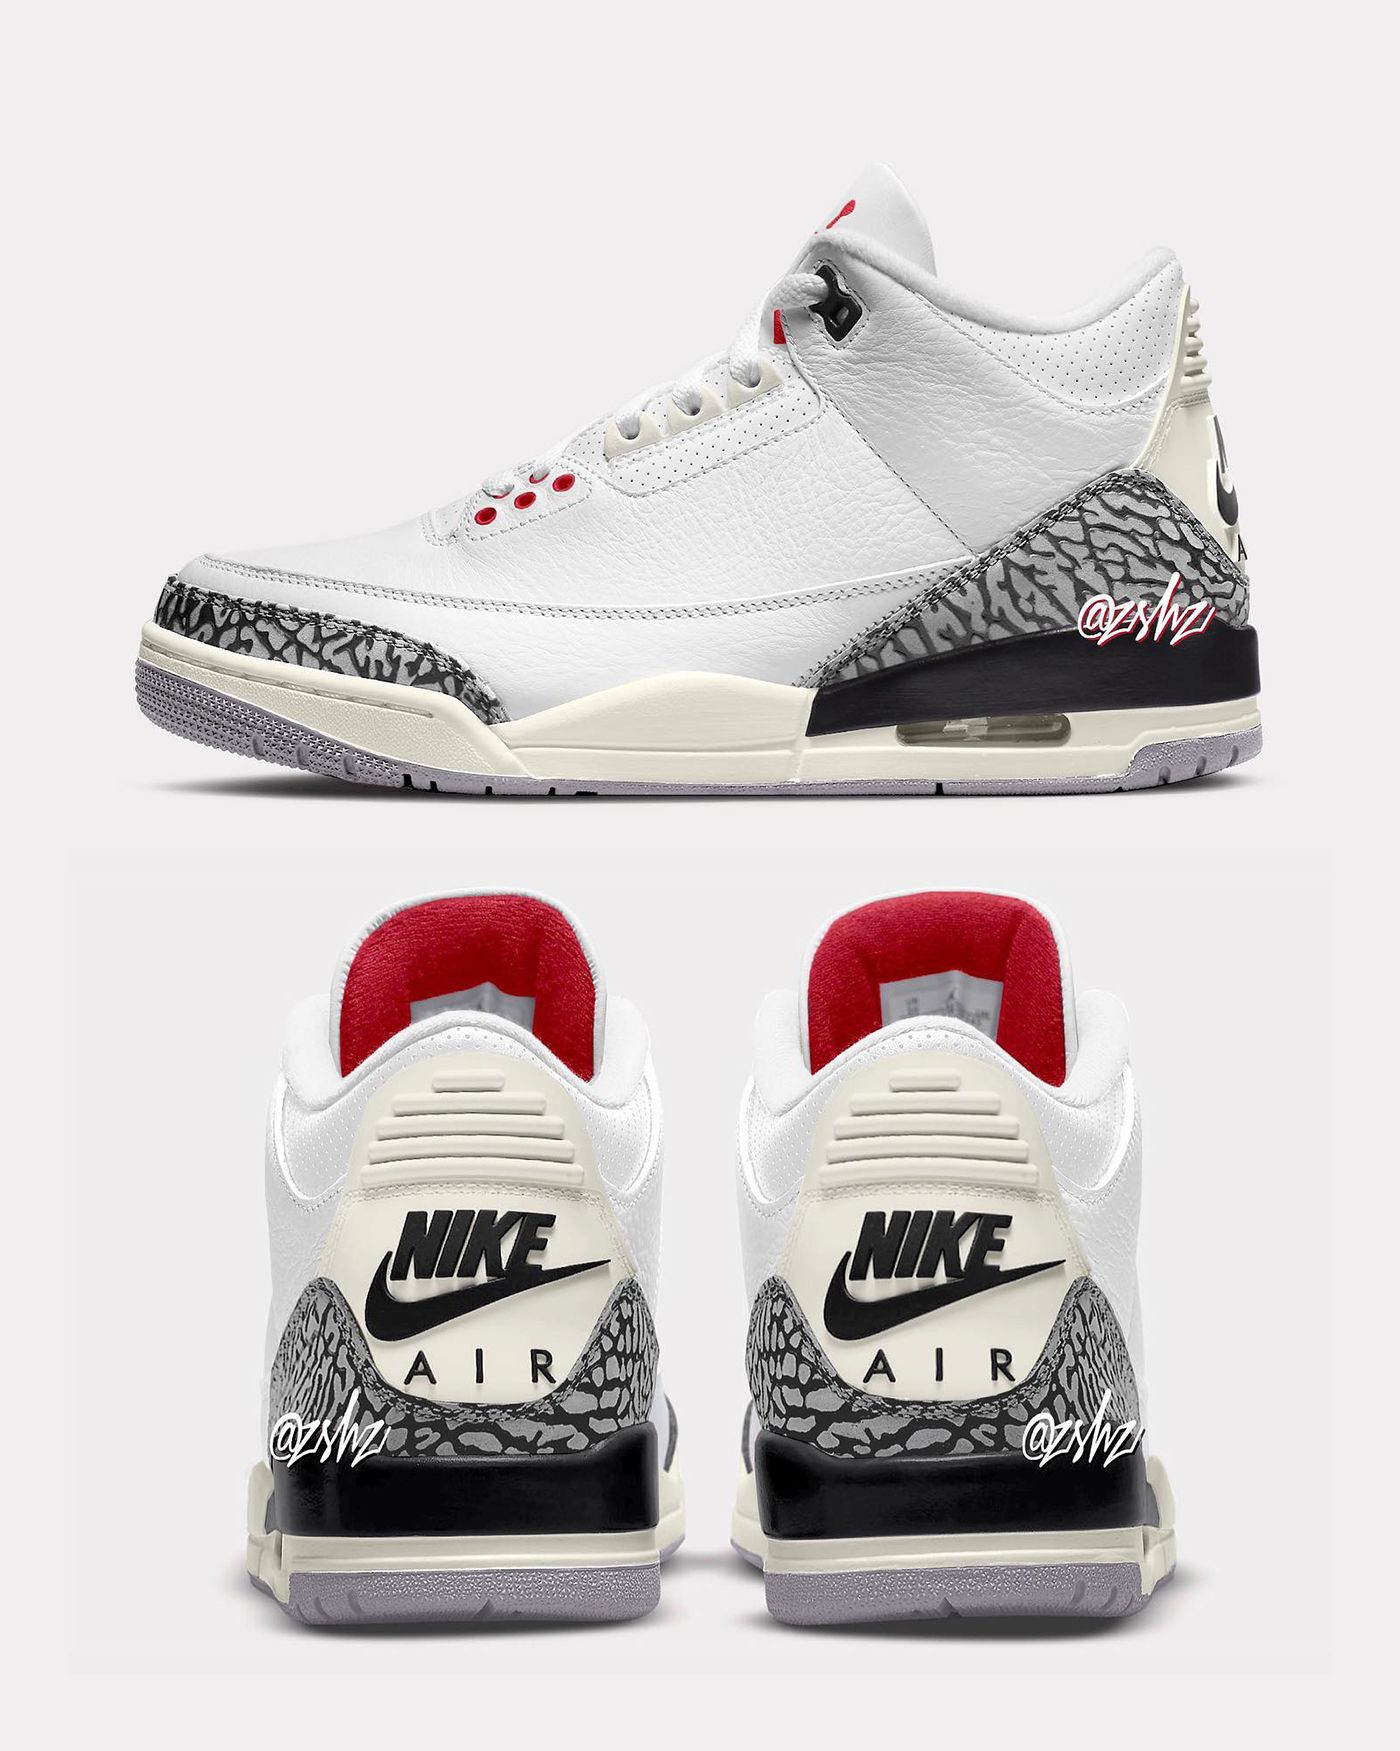 Reimagined Air Jordan 3 "White Cement" Releasing March 2023 | HOUSE OF HEAT